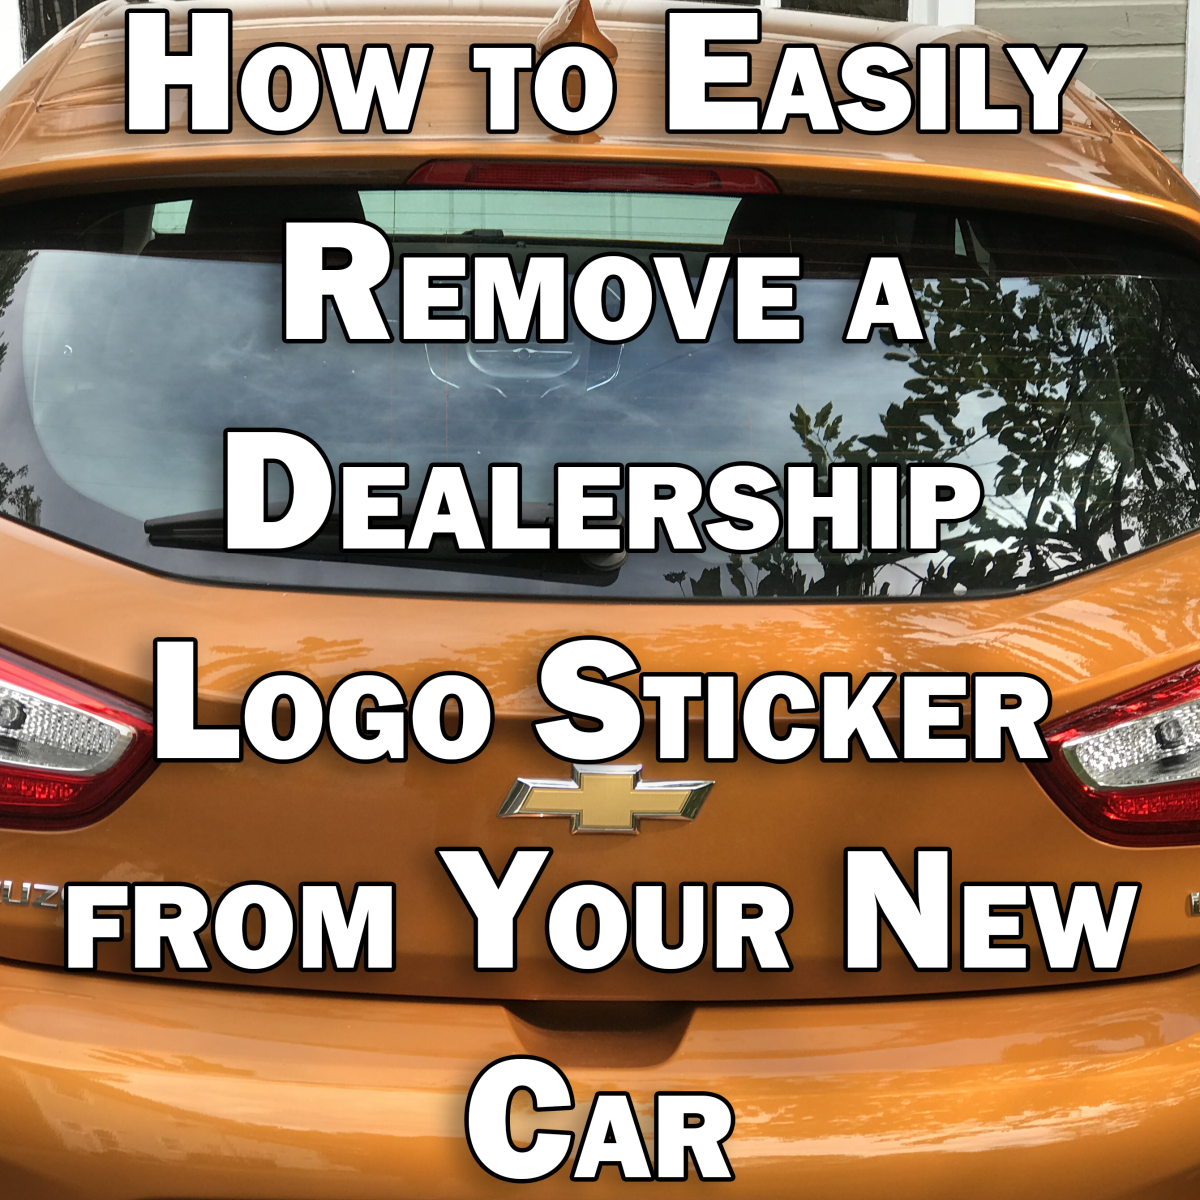 How to Easily Remove a Dealership Logo Sticker From Your New Car